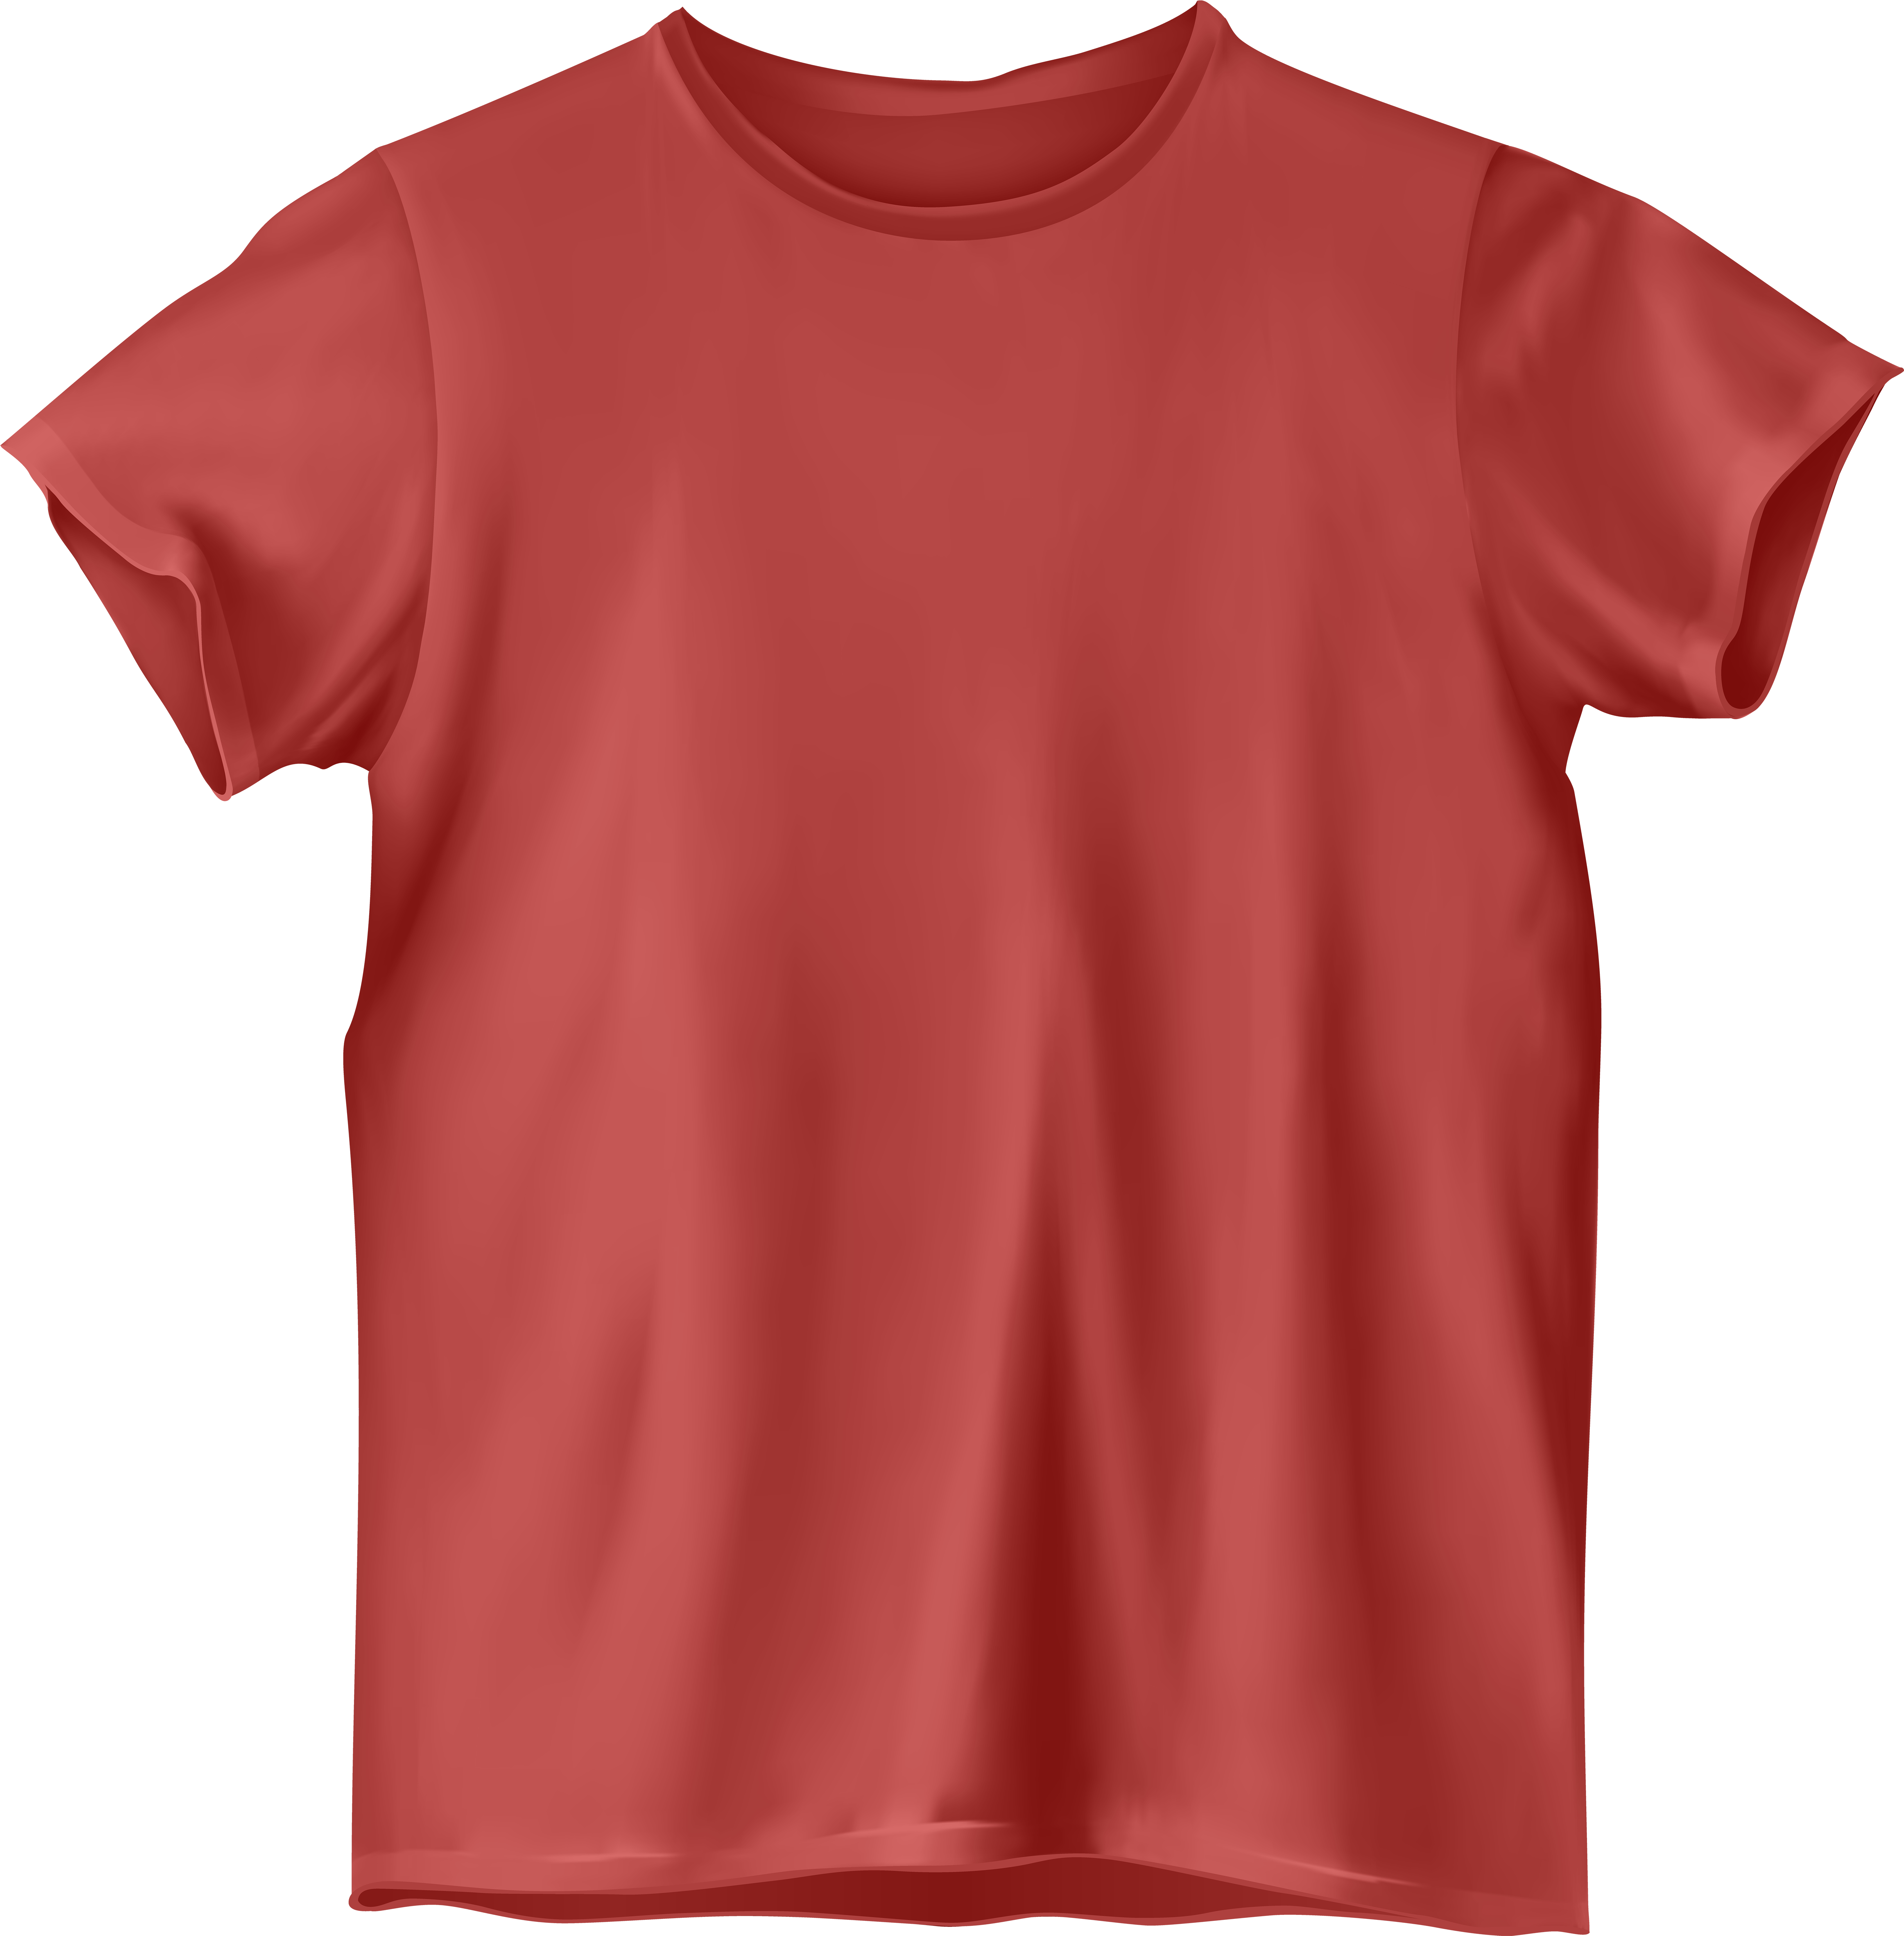 A Red T-shirt On A Black Background